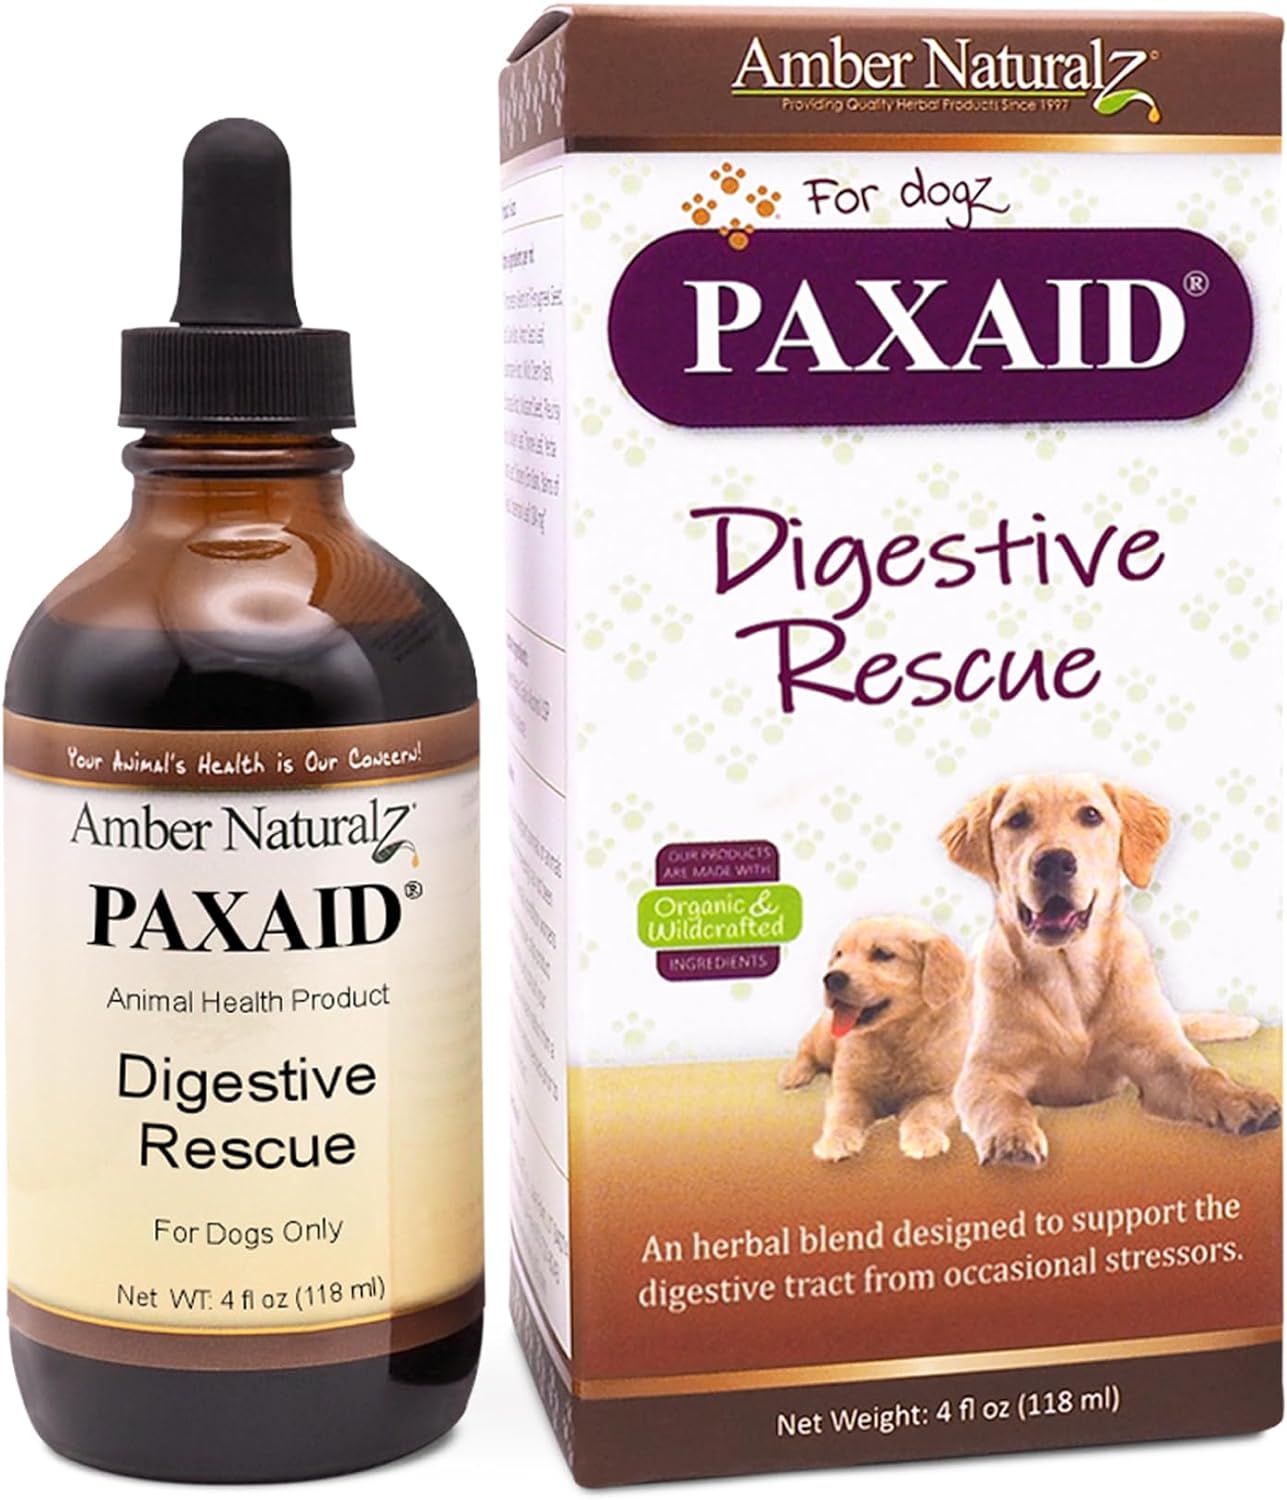 Amber NaturalZ Paxaid Digestive Rescue Herbal Supplement for Dogs and Puppies | Canine Herbal Supplement for Occasional Digestive Upset Support | 4 Fluid Ounce Glass Bottle | Manufactured in The USA